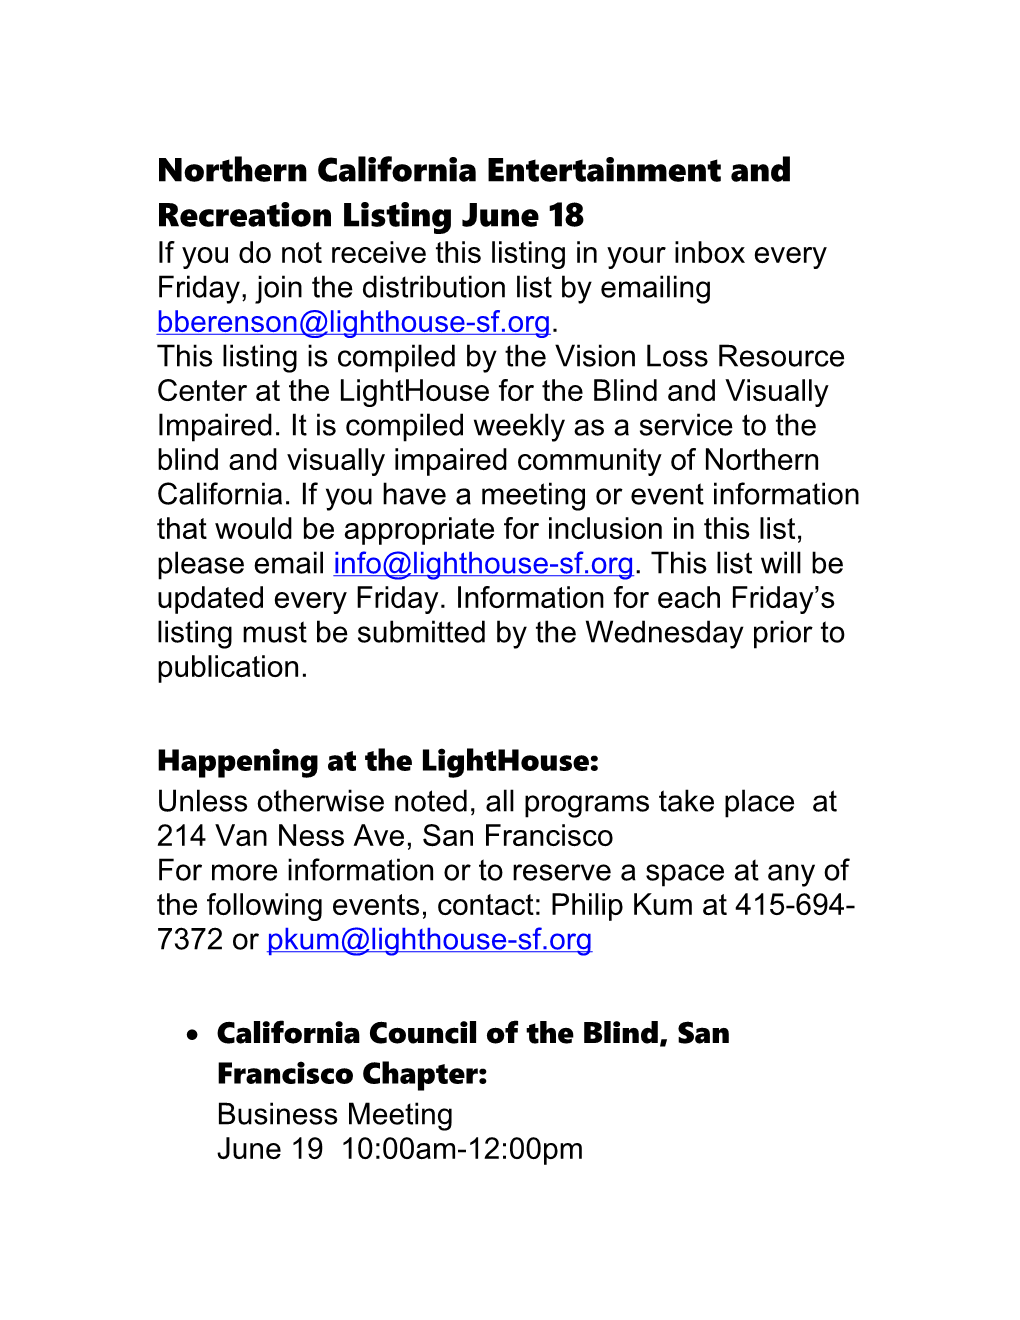 Northern California Entertainment and Recreation Listing January 29